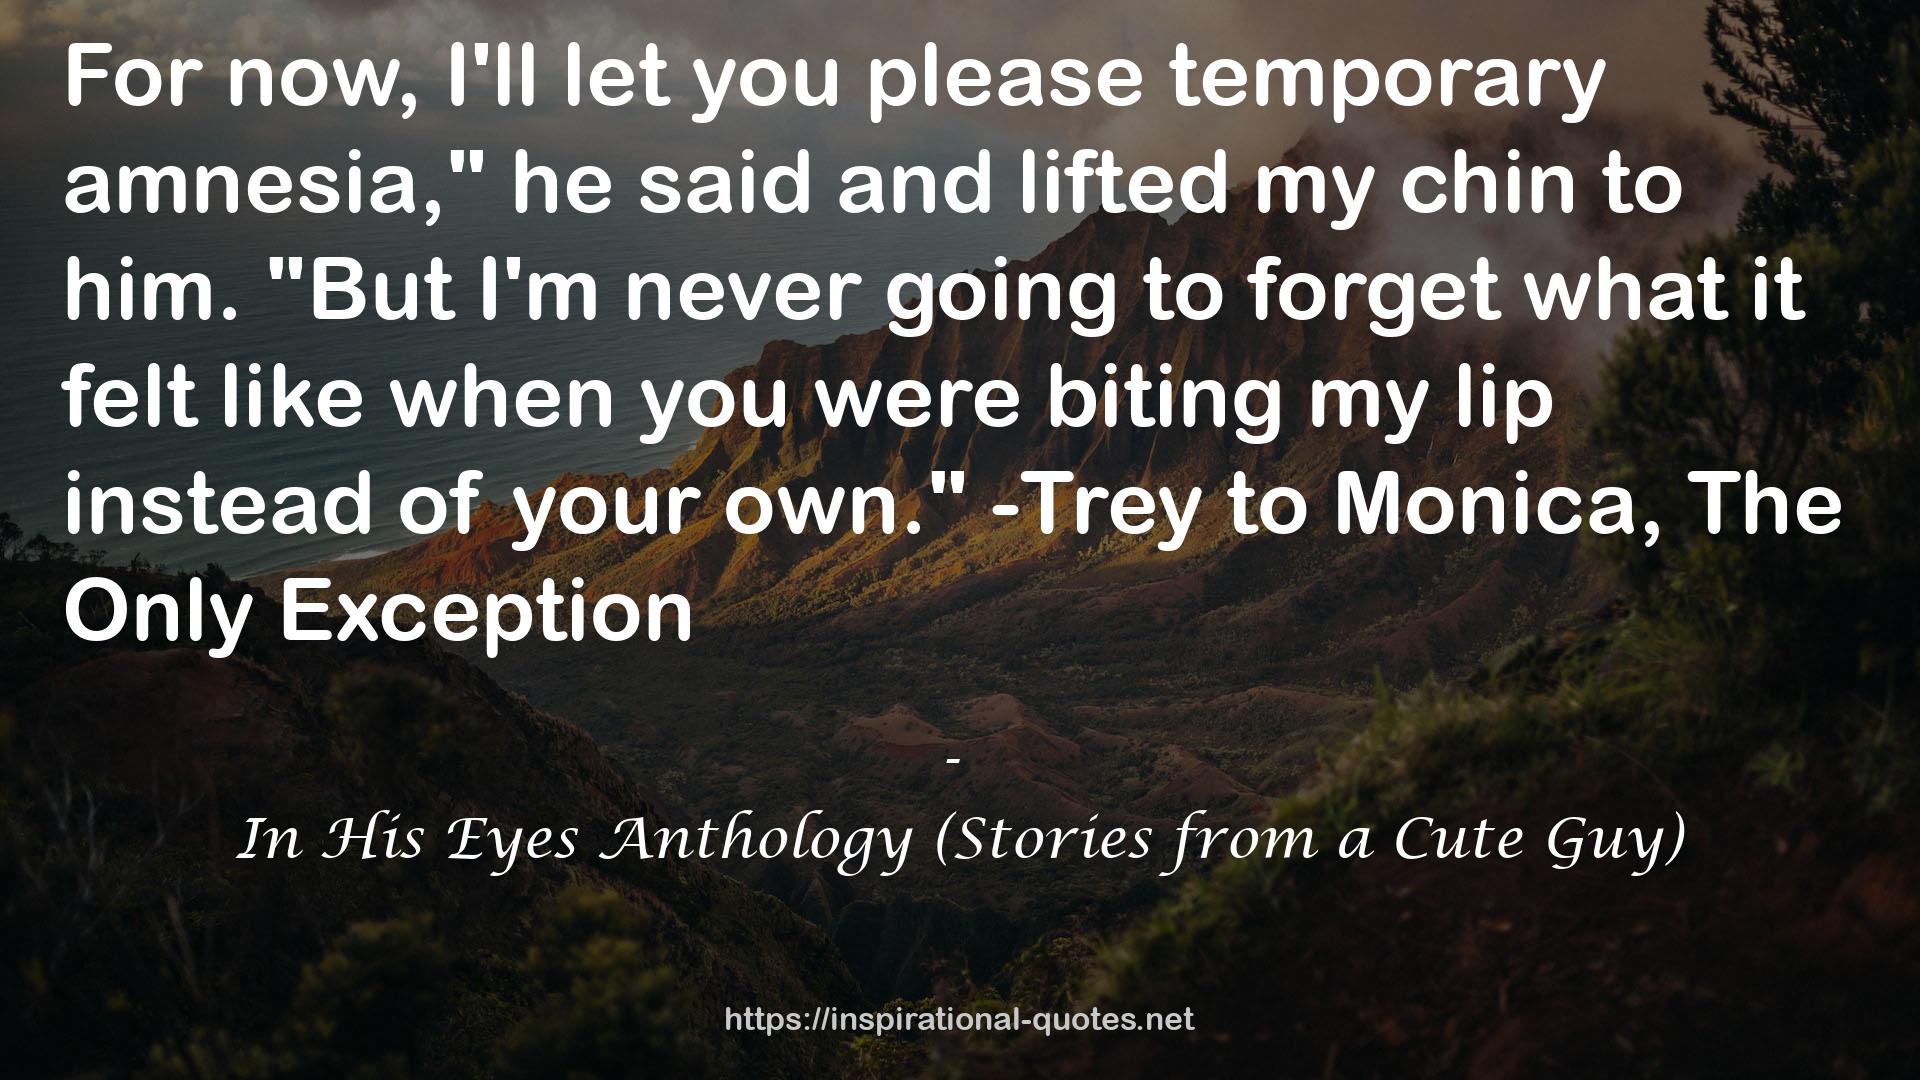 In His Eyes Anthology (Stories from a Cute Guy) QUOTES